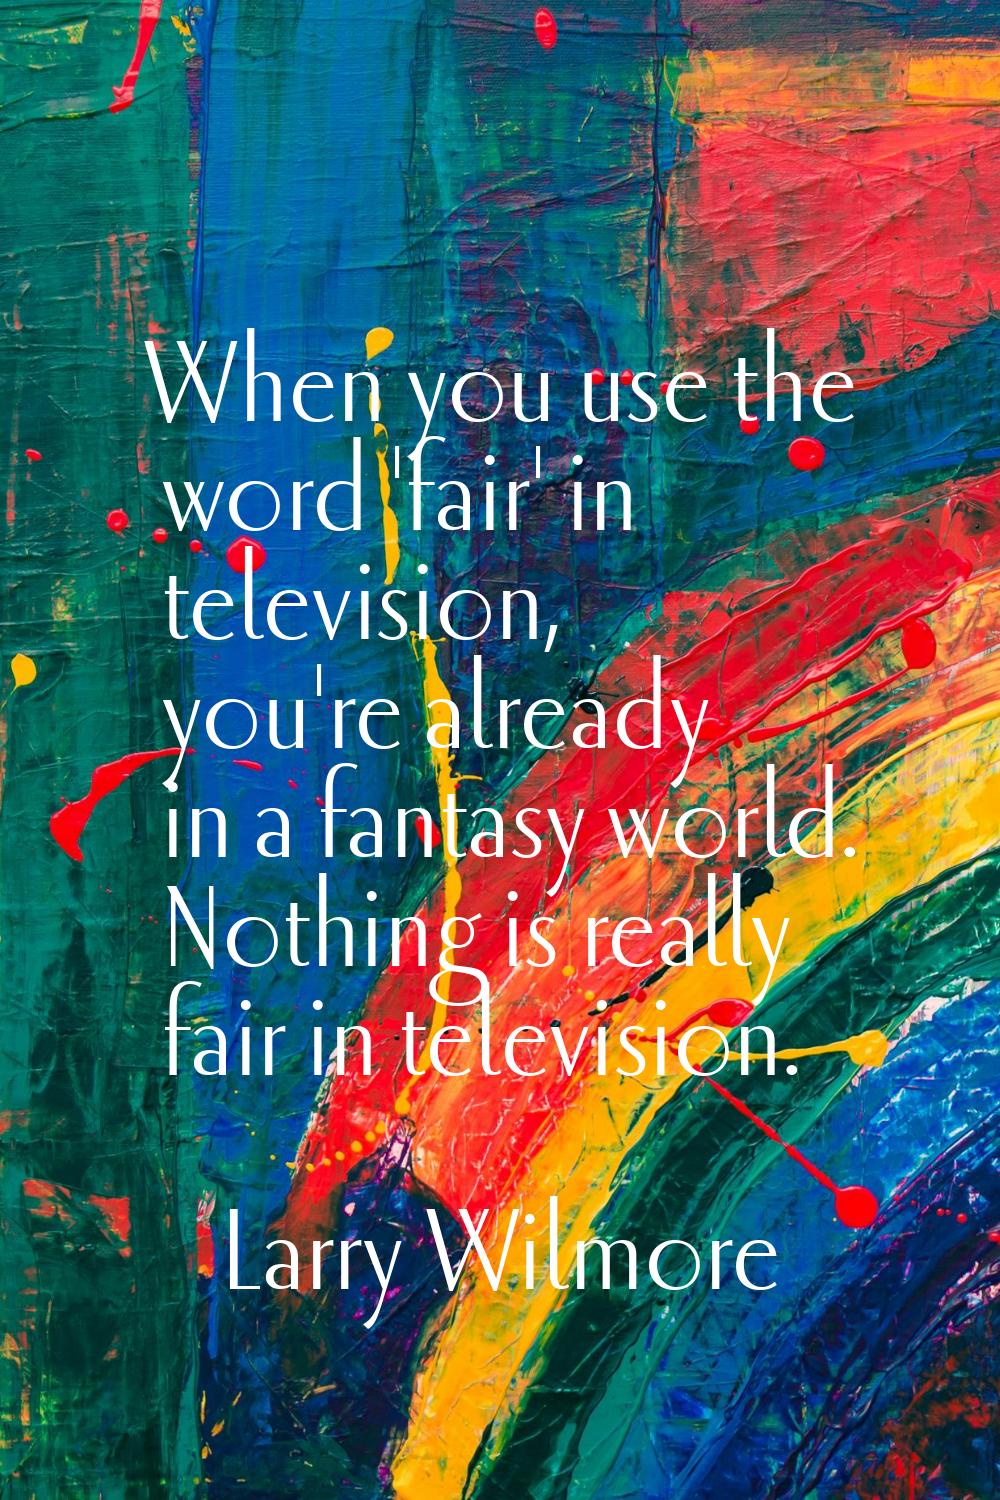 When you use the word 'fair' in television, you're already in a fantasy world. Nothing is really fa